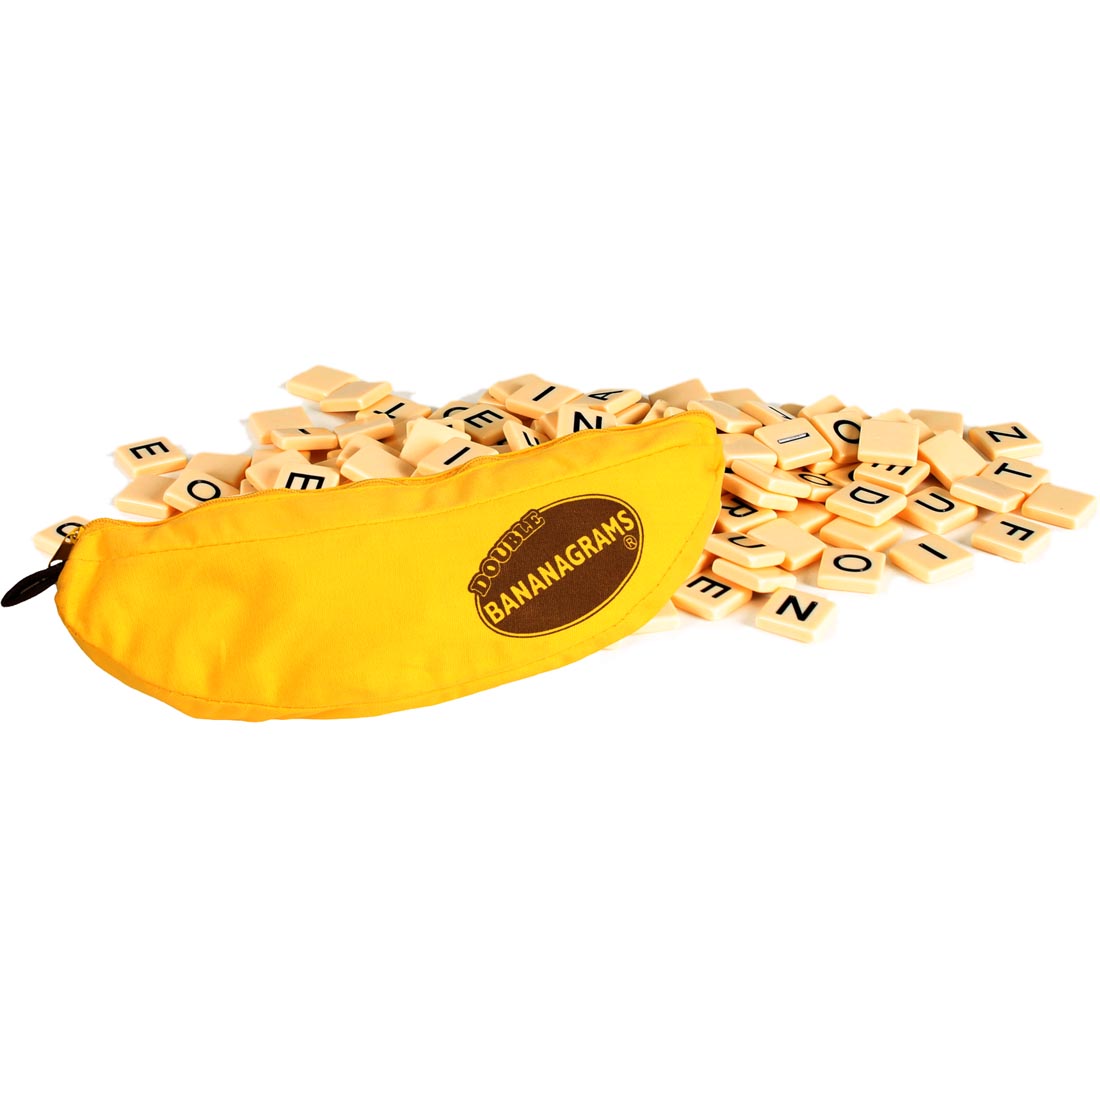 Double Bananagrams Game with Tiles Outside the Banana-Shaped Package